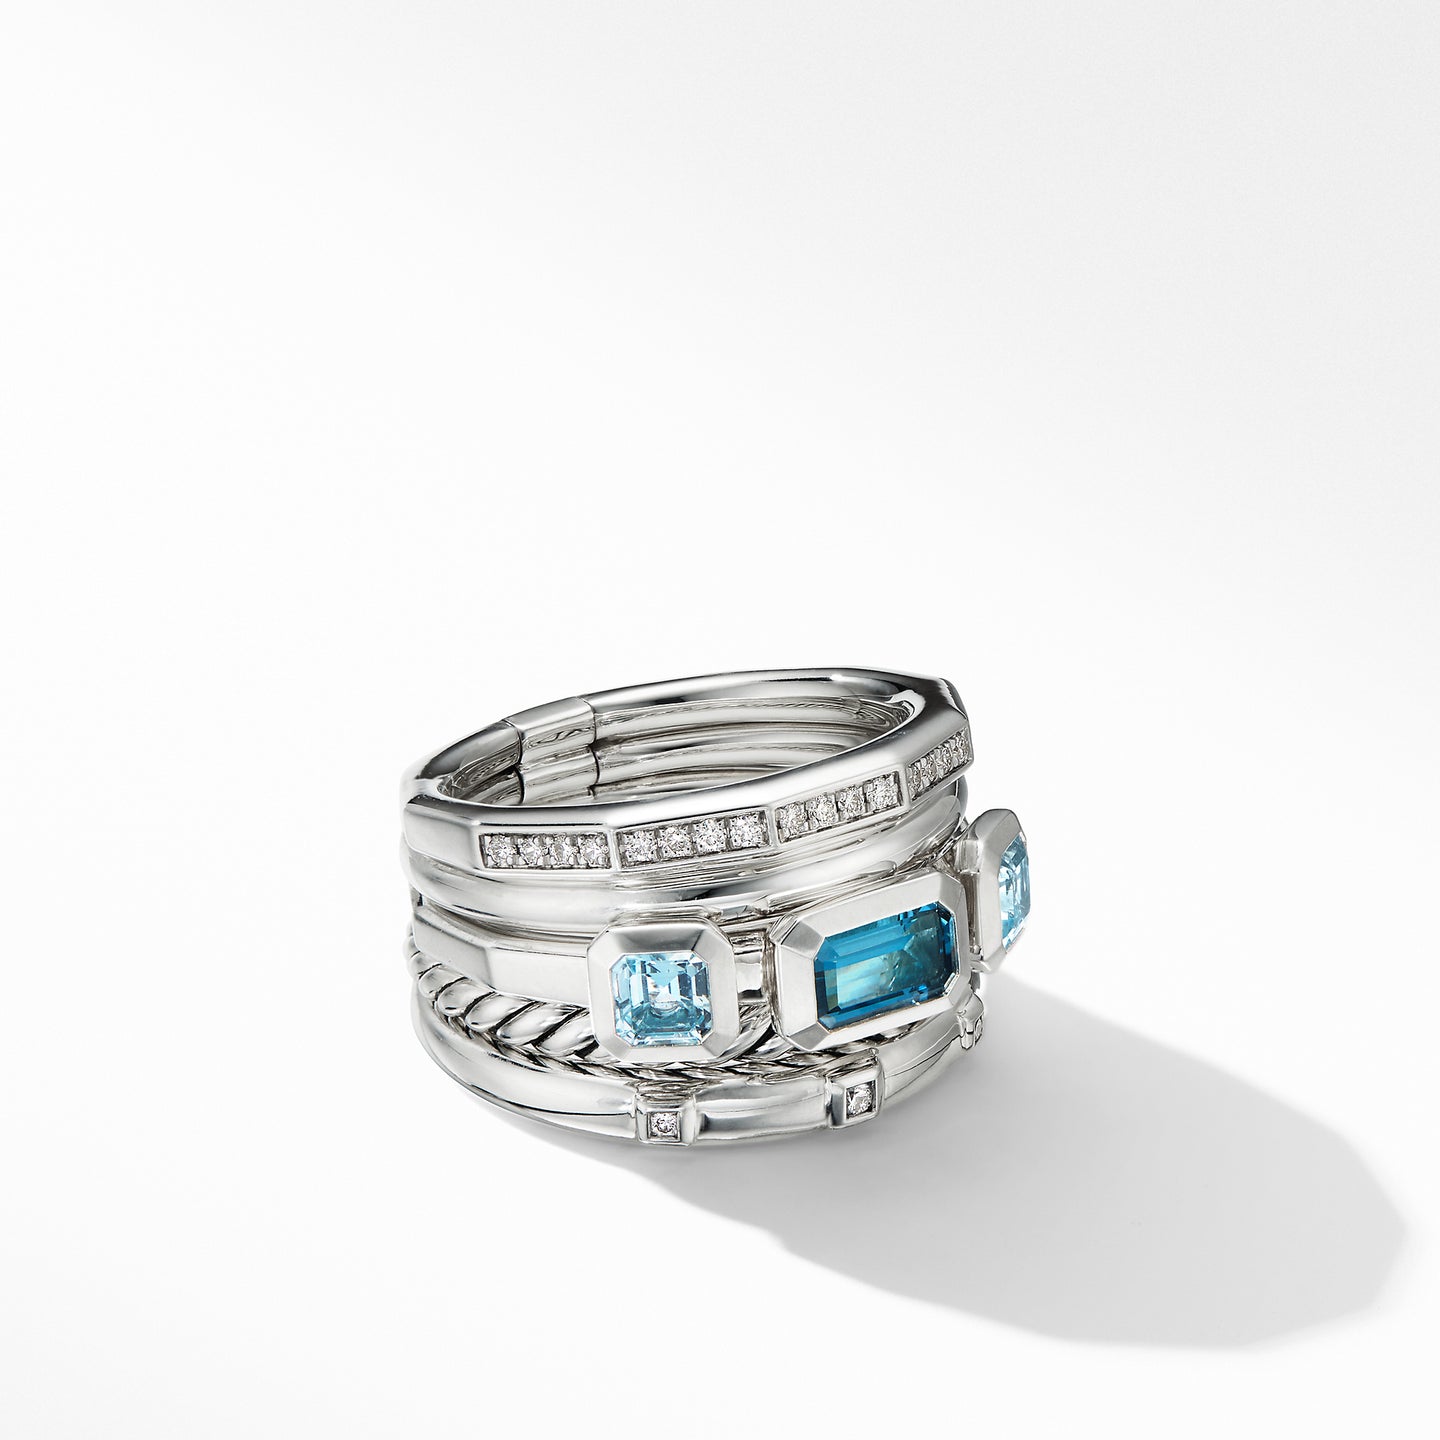 Stax Wide Ring with Hampton Blue Topaz and Diamonds, Size 7.5